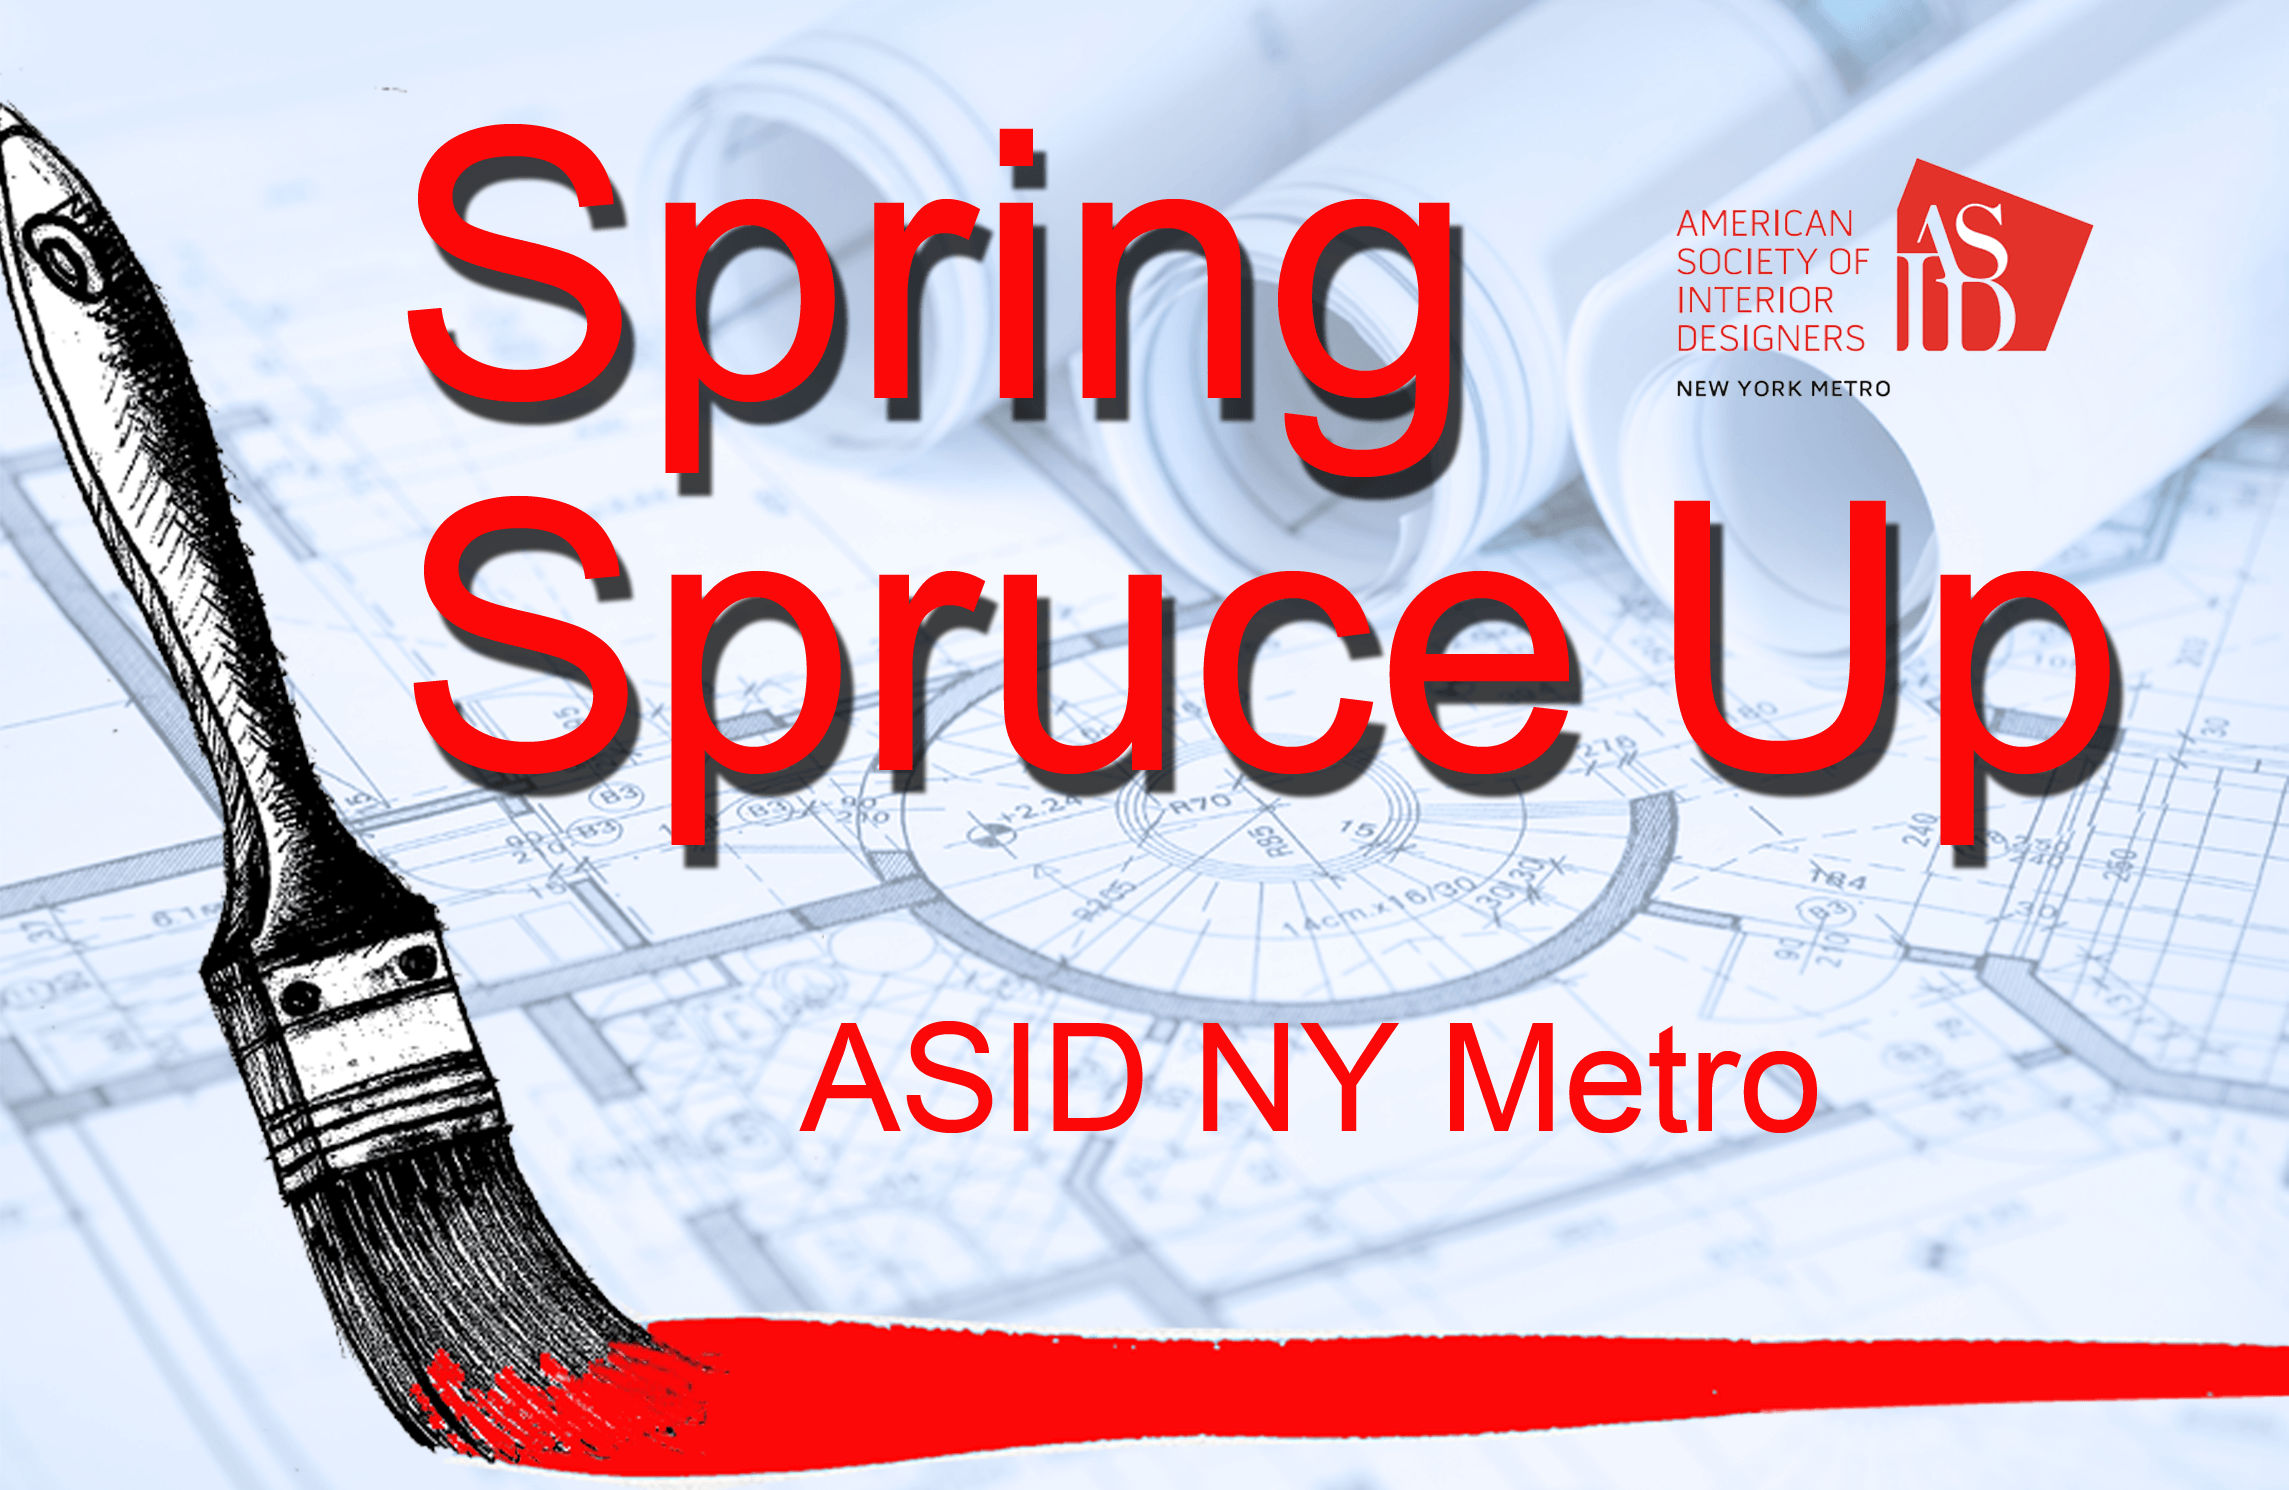 ASID Logo - American Society of Interior Designers – 'Spring Spruce Up 2016' and ...